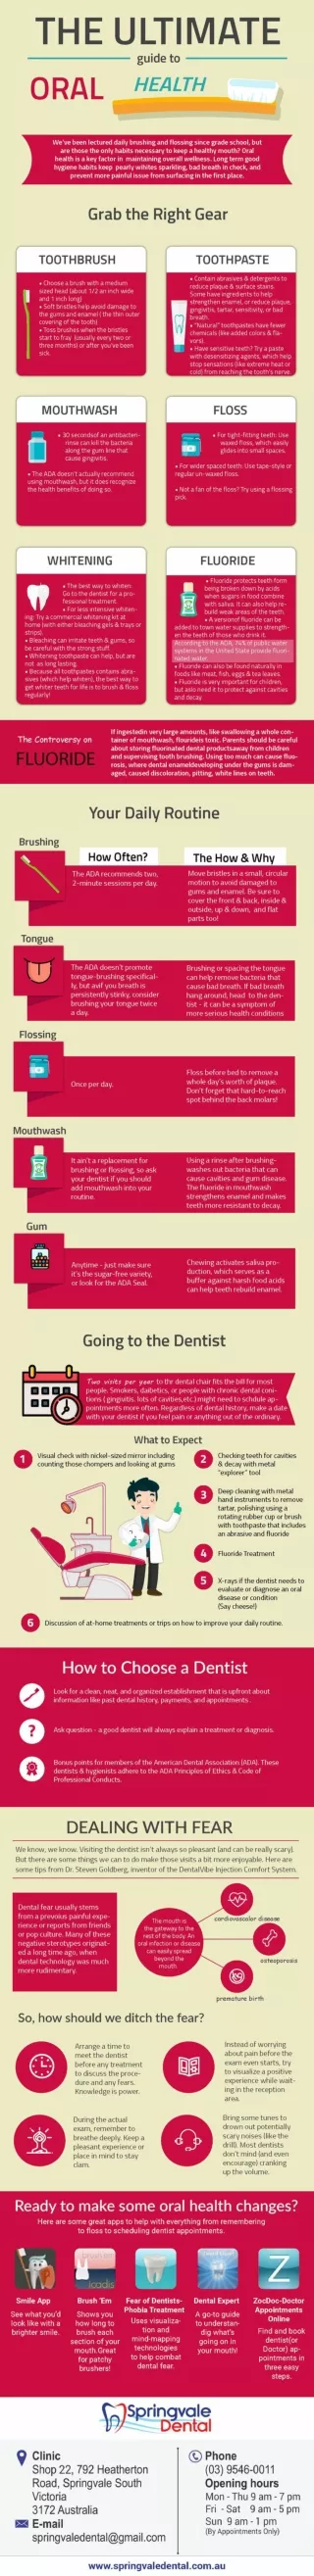 Ultimate Guide To Oral Health